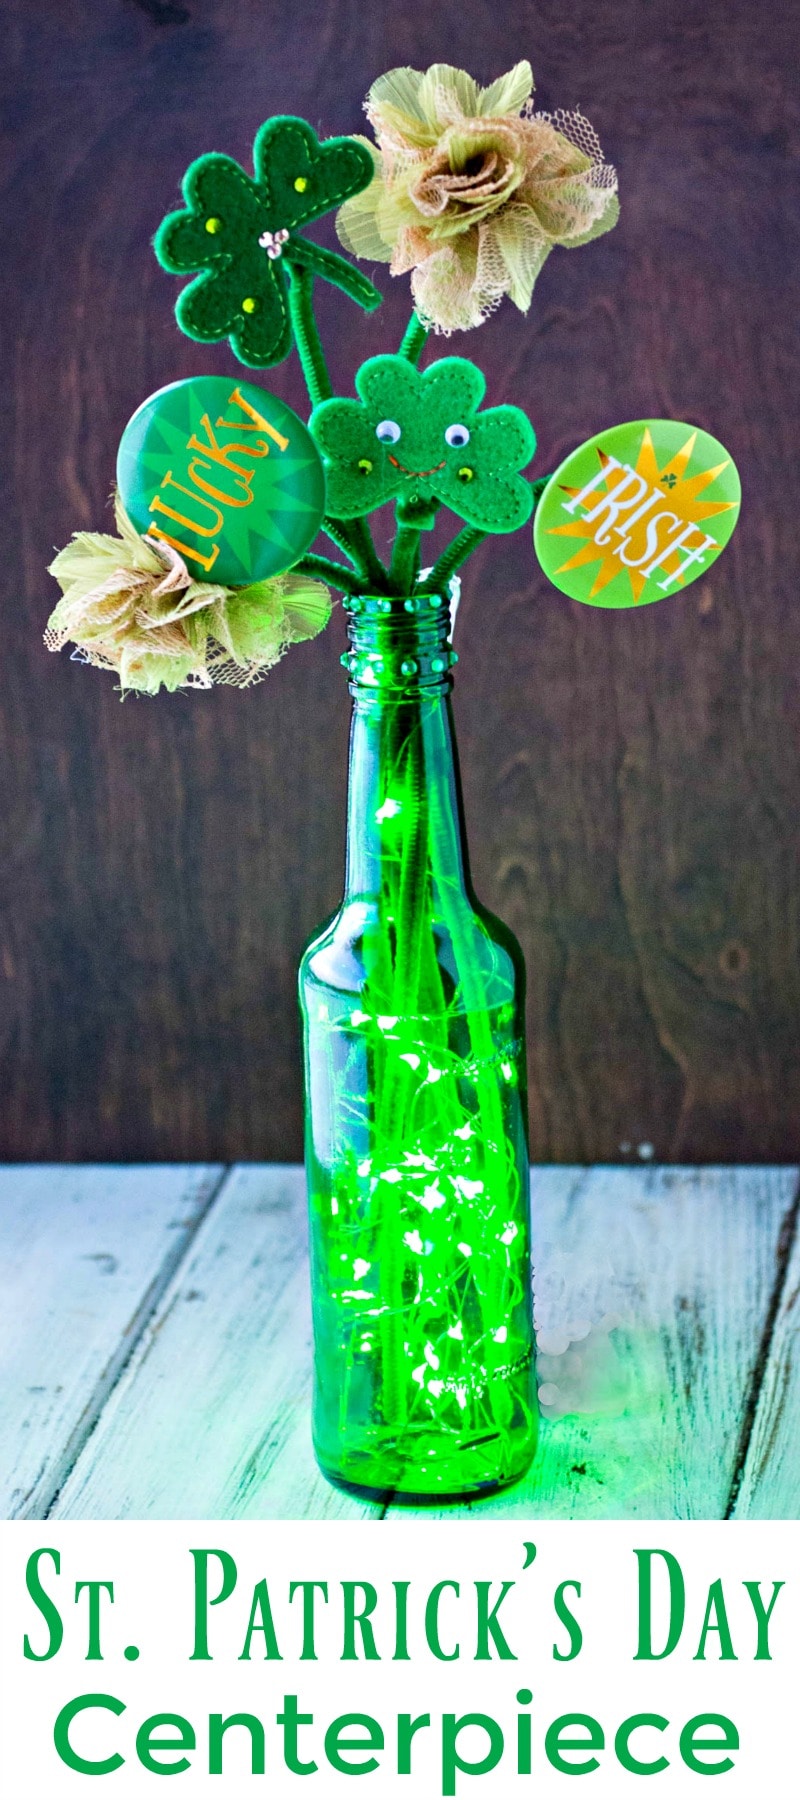 St patrick's day centerpiece with green flowers.